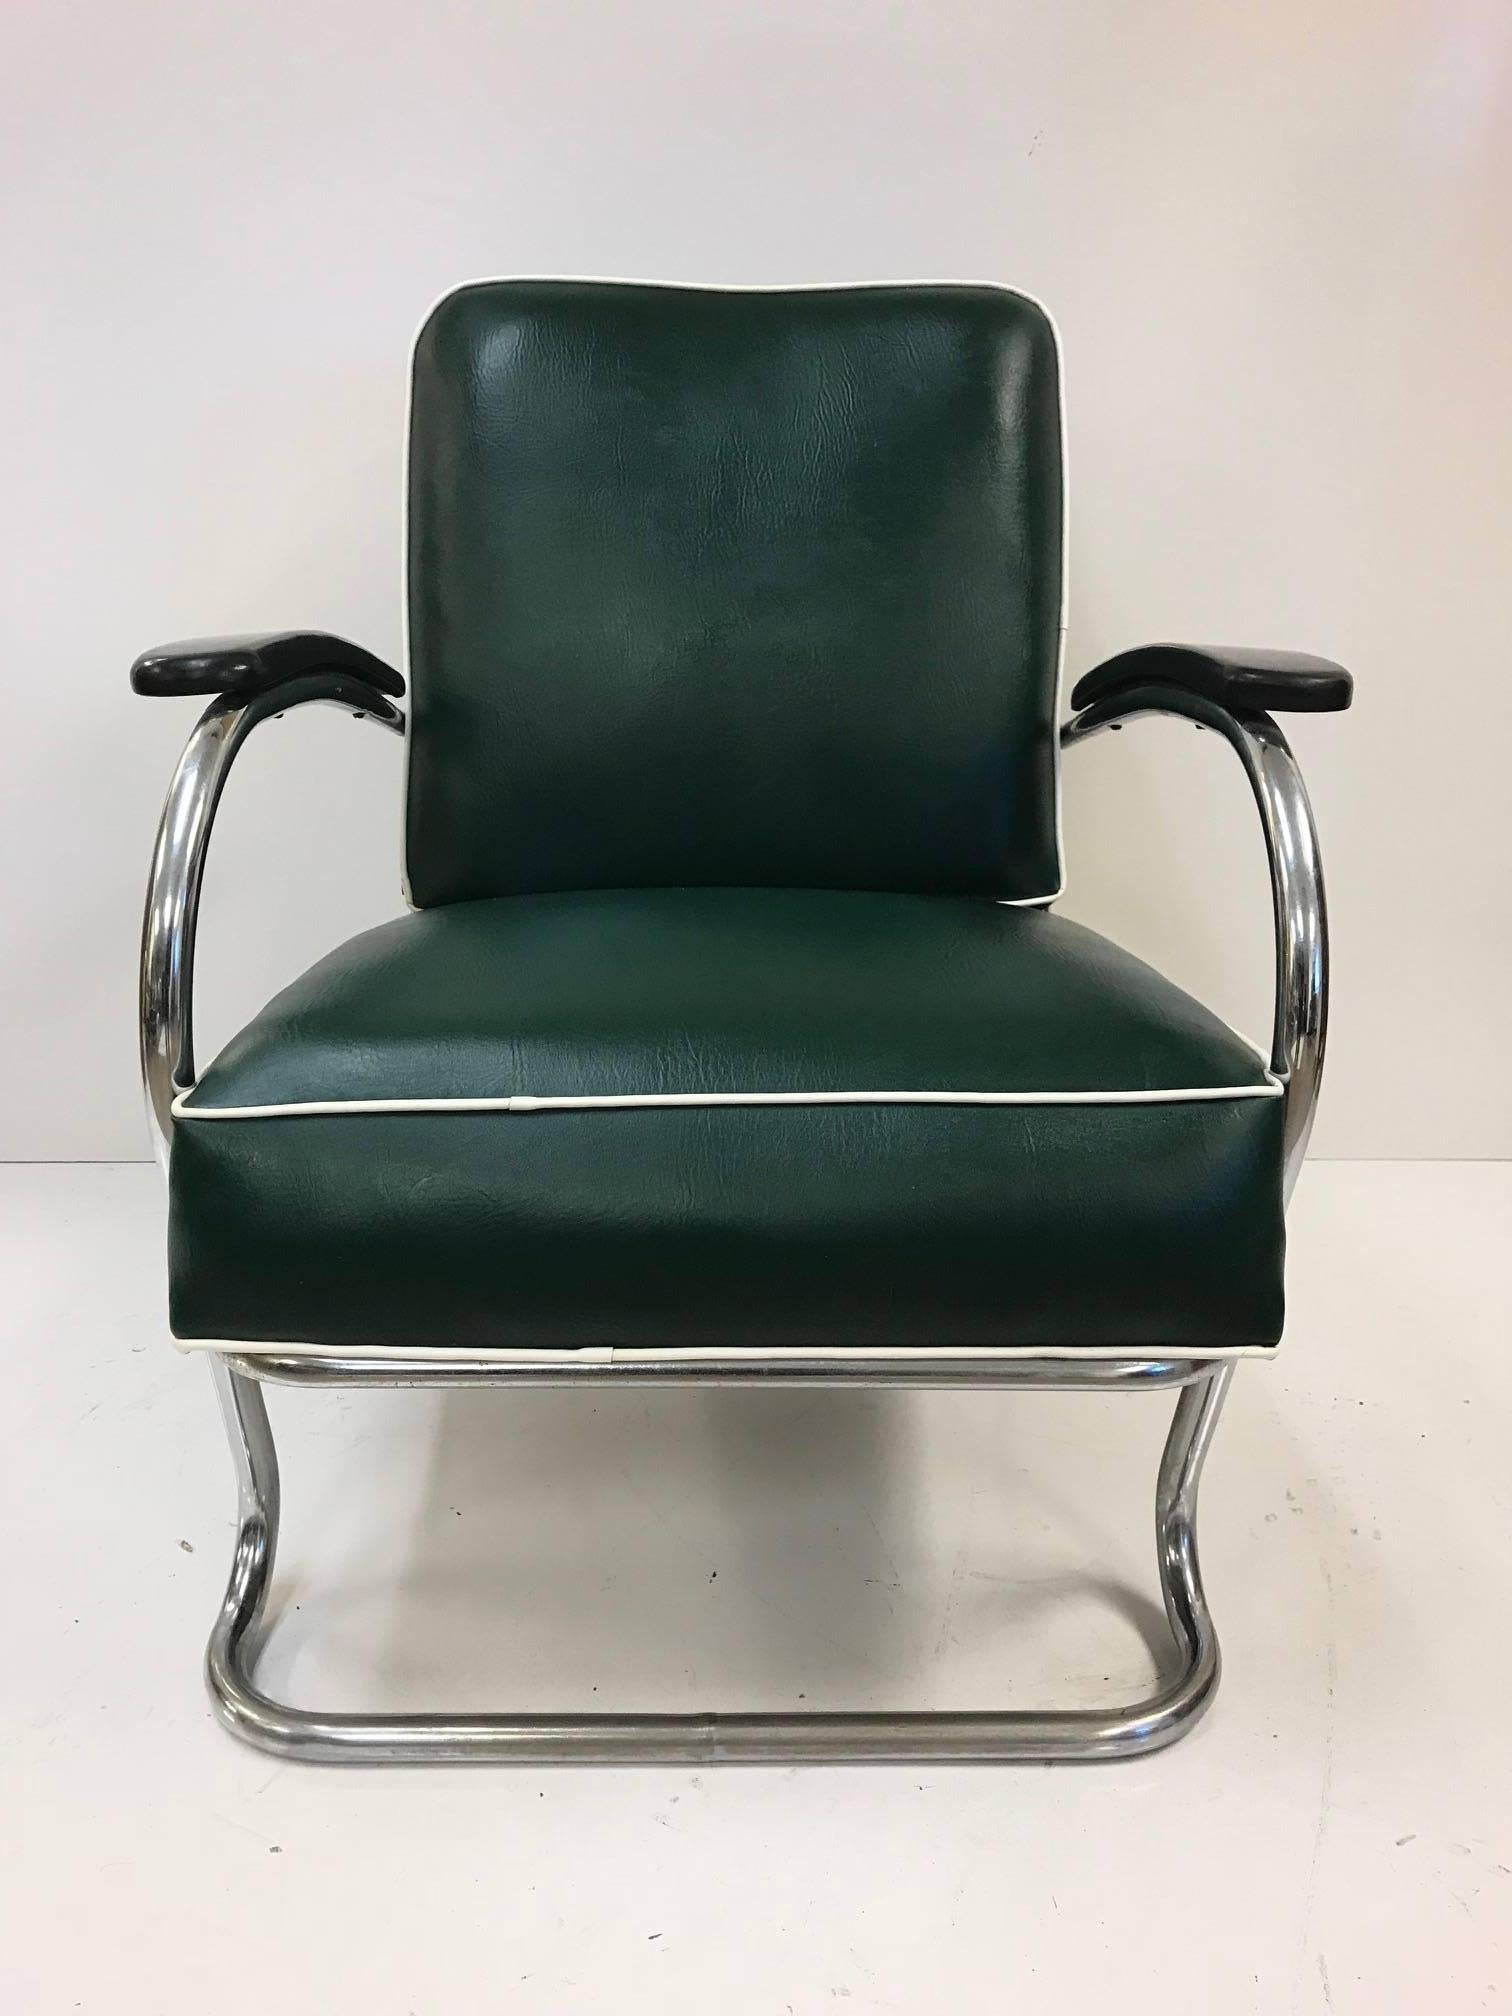 Pair of KEM Weber for Lloyd Tubular chrome lounge chairs. Chairs are vinyl with a steel frame. Chairs have original fabric and are of a hunter green color with white trim.
 
   